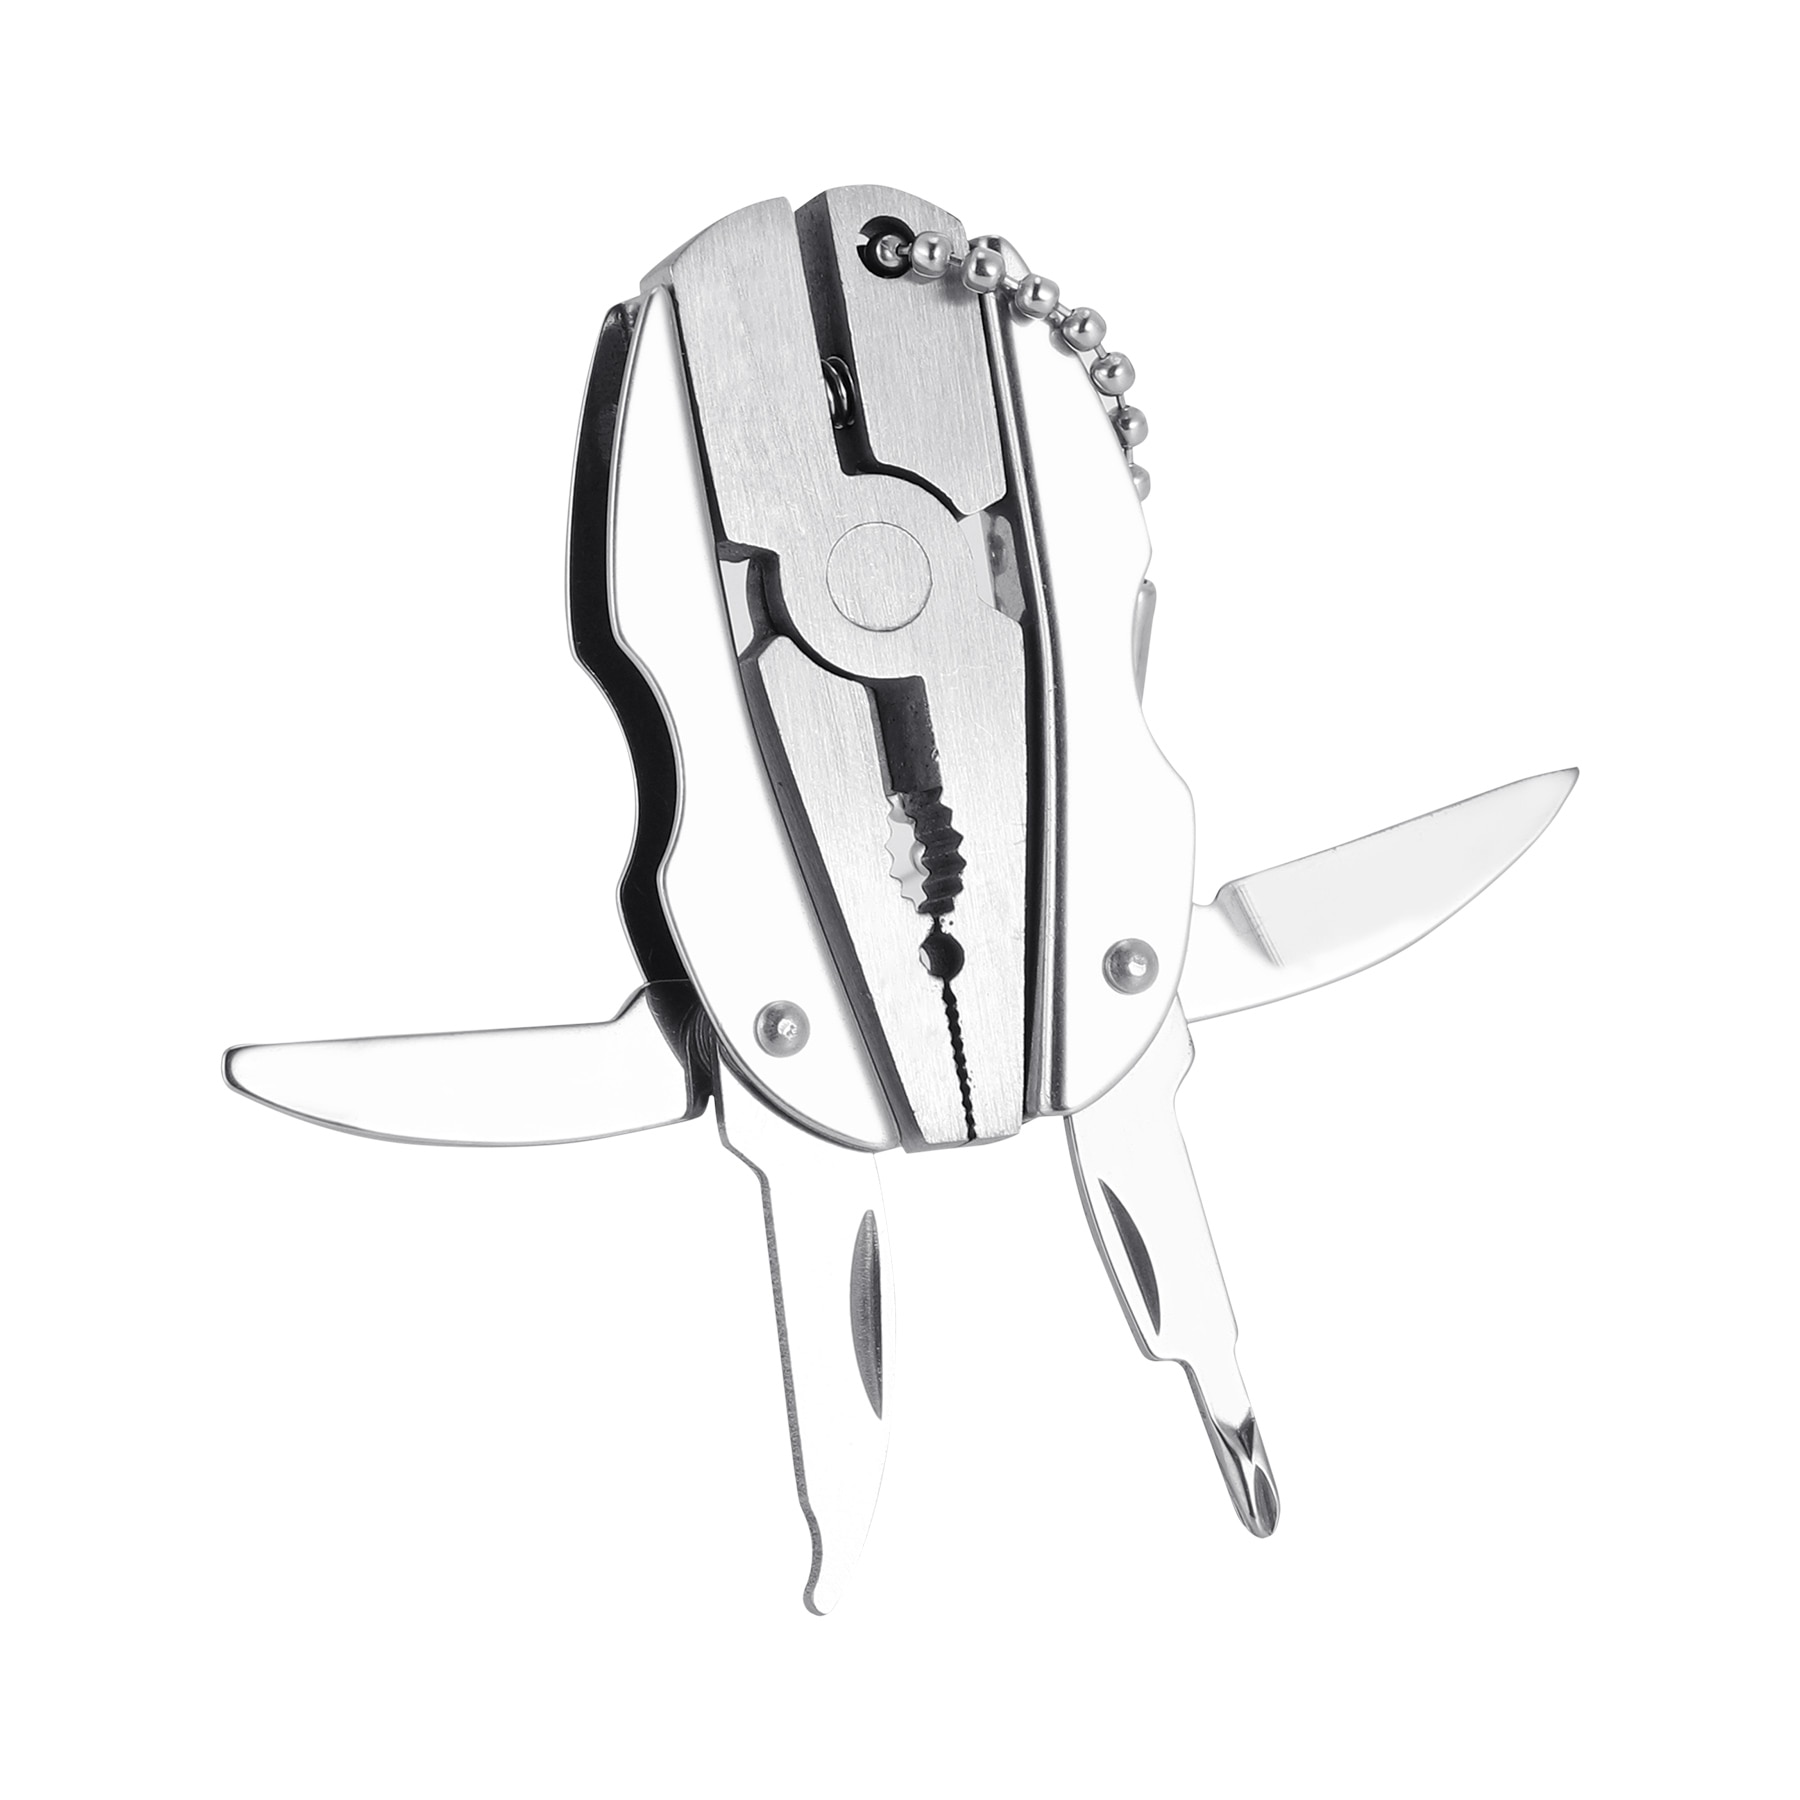 Stainless-Steel-Outdoor-Portable-Multitool-Pliers-Knife-Keychain-Screwdriver-Multi-Tools-Mini-Pliers-1005002029225692